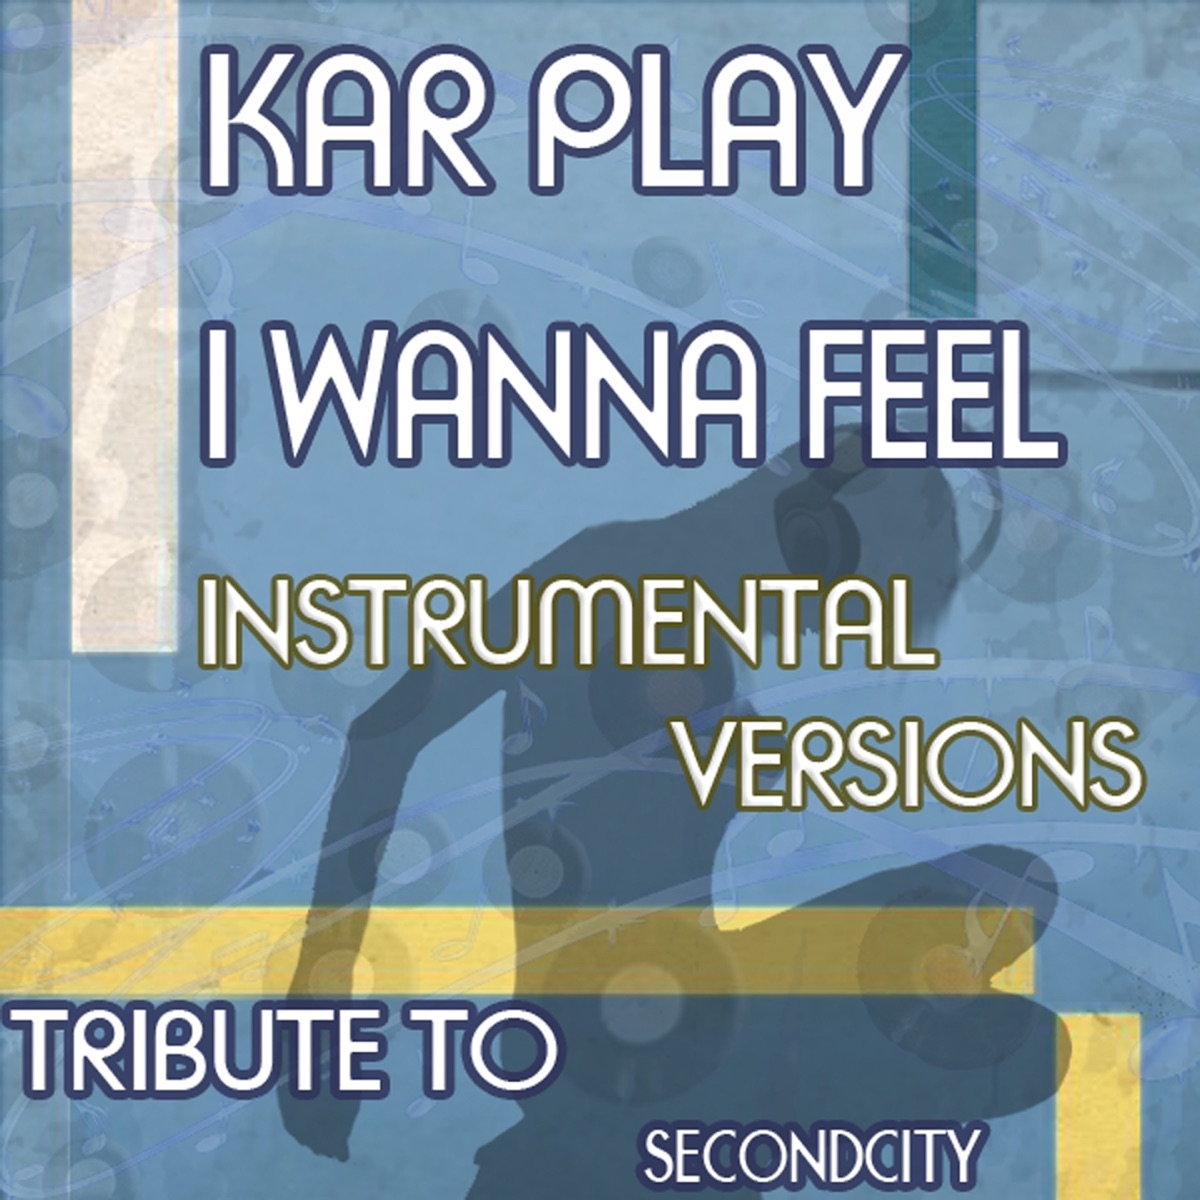 Roar - Tribute to Katy Perry (Instrumental Version) - song and